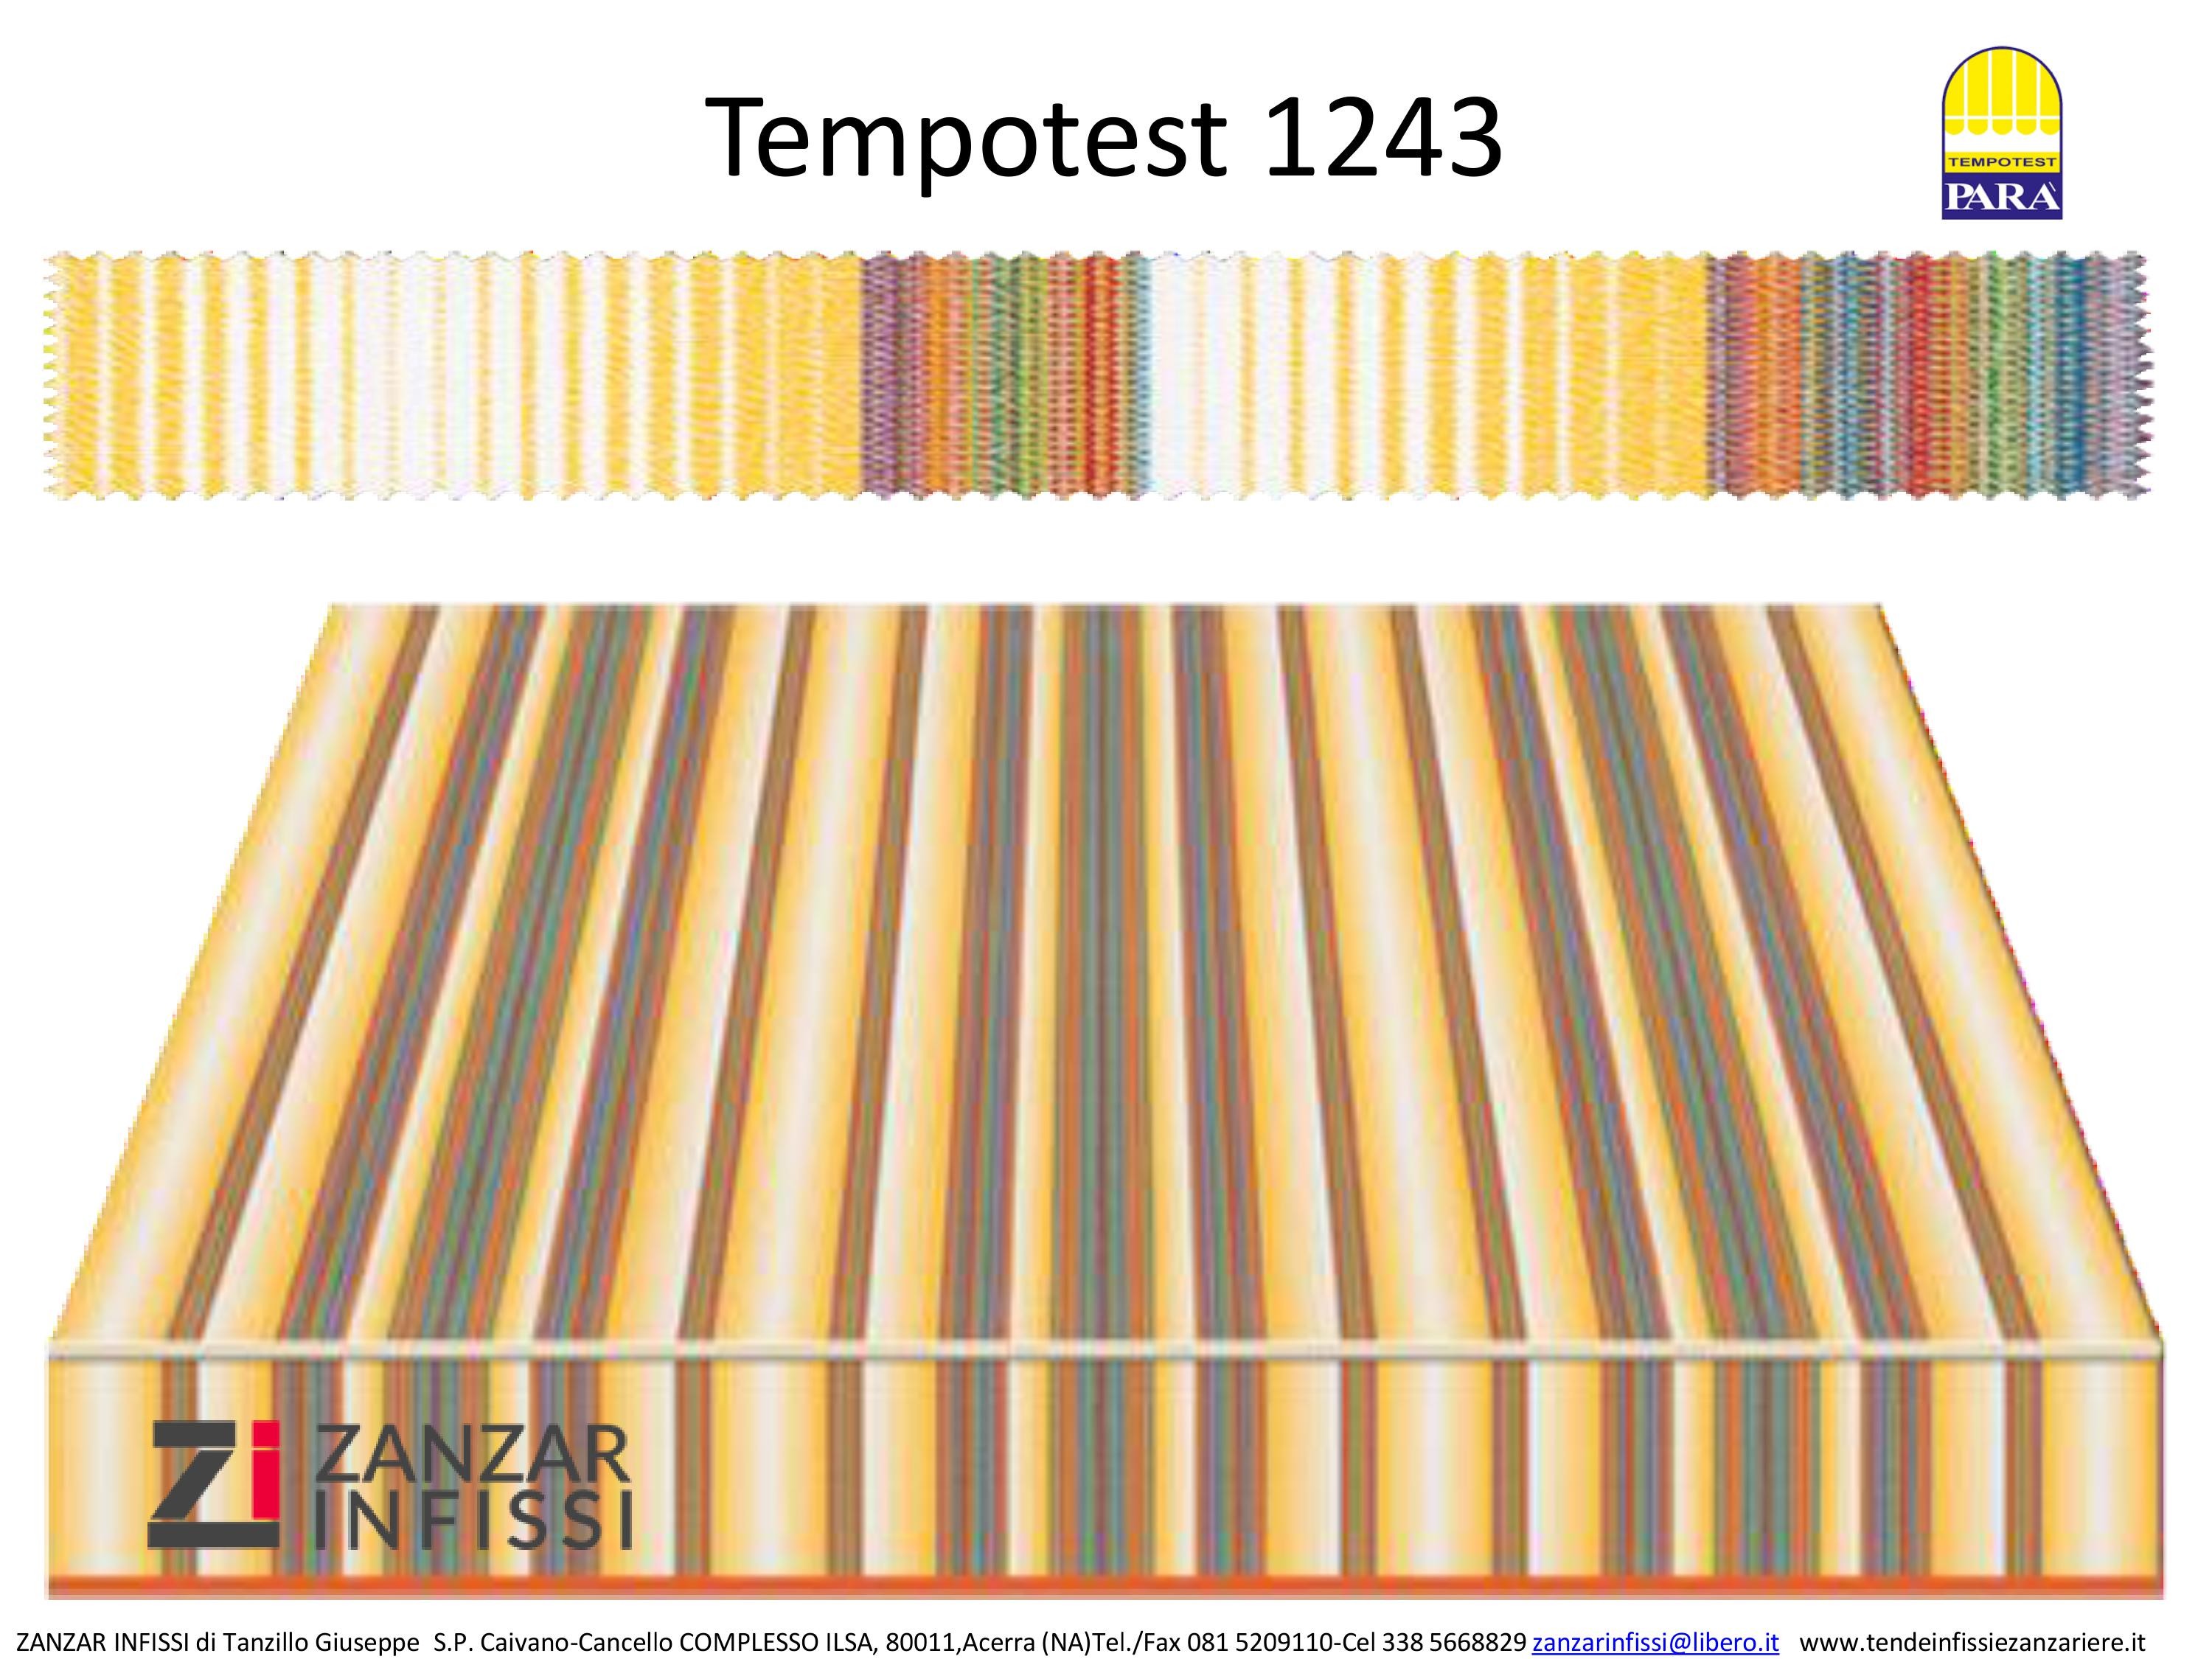 Tempotest 1243